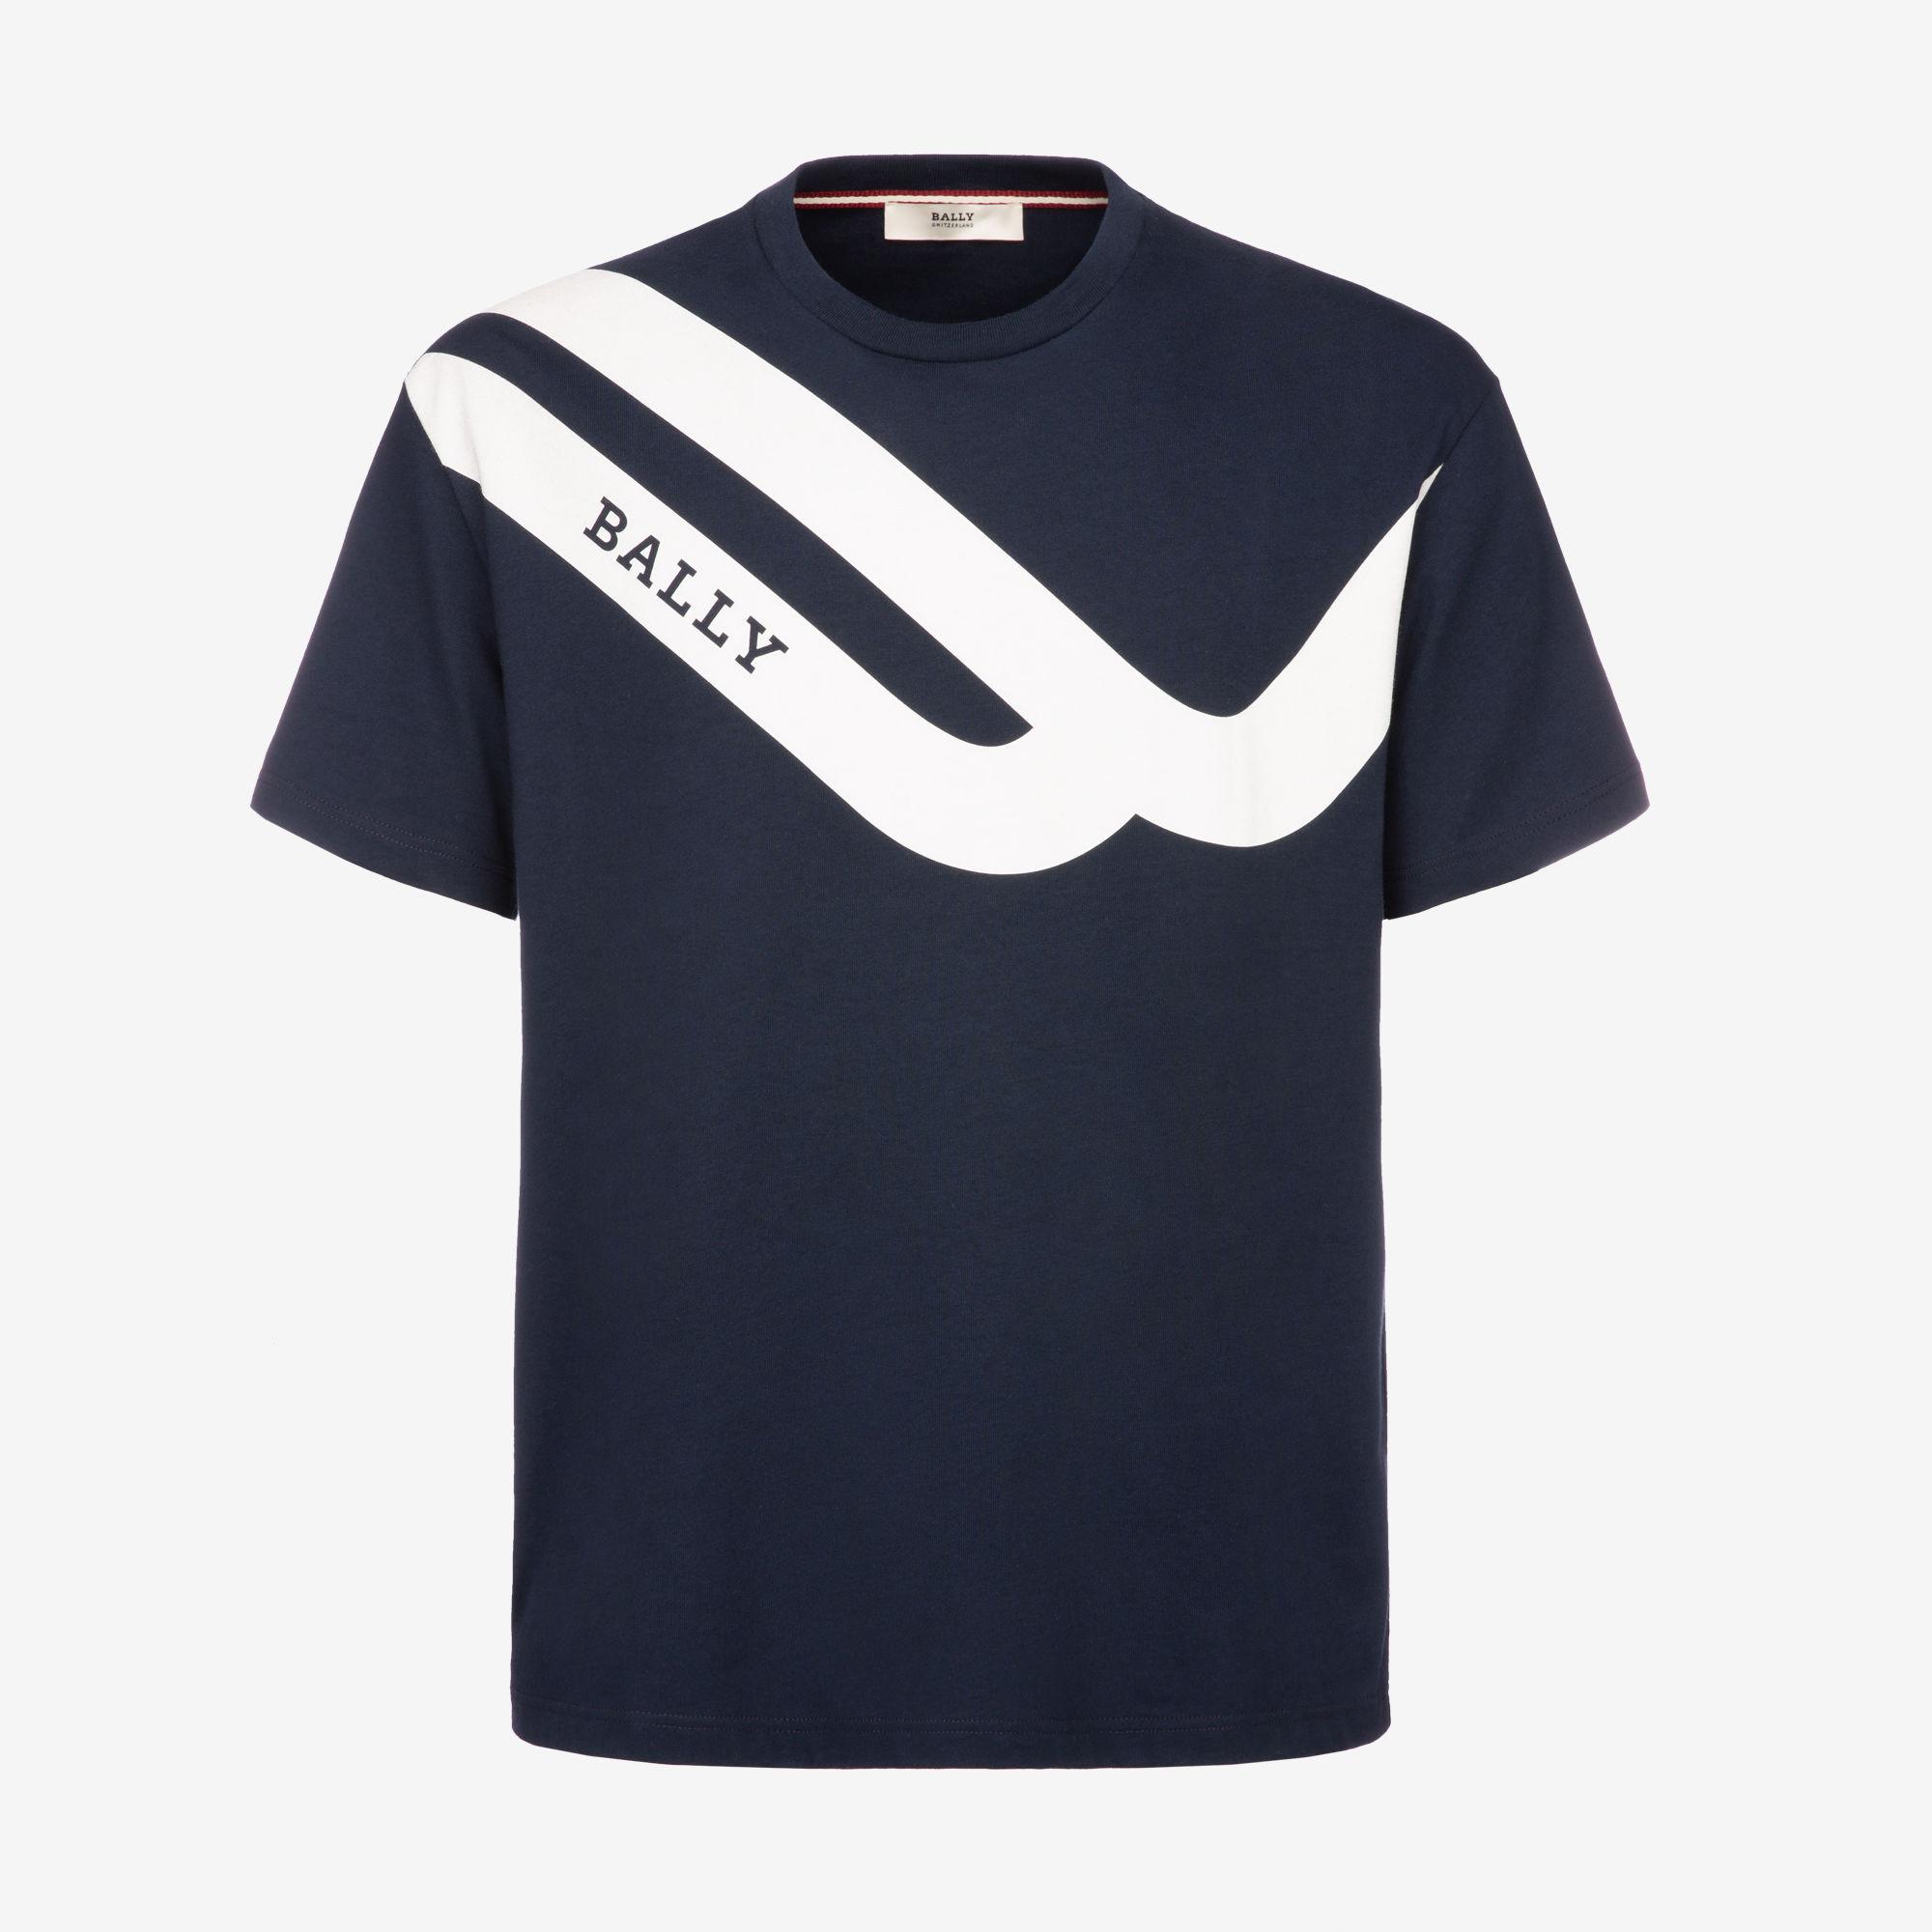 Bally Cotton Competition T-shirt in Blue for Men - Save 27% - Lyst